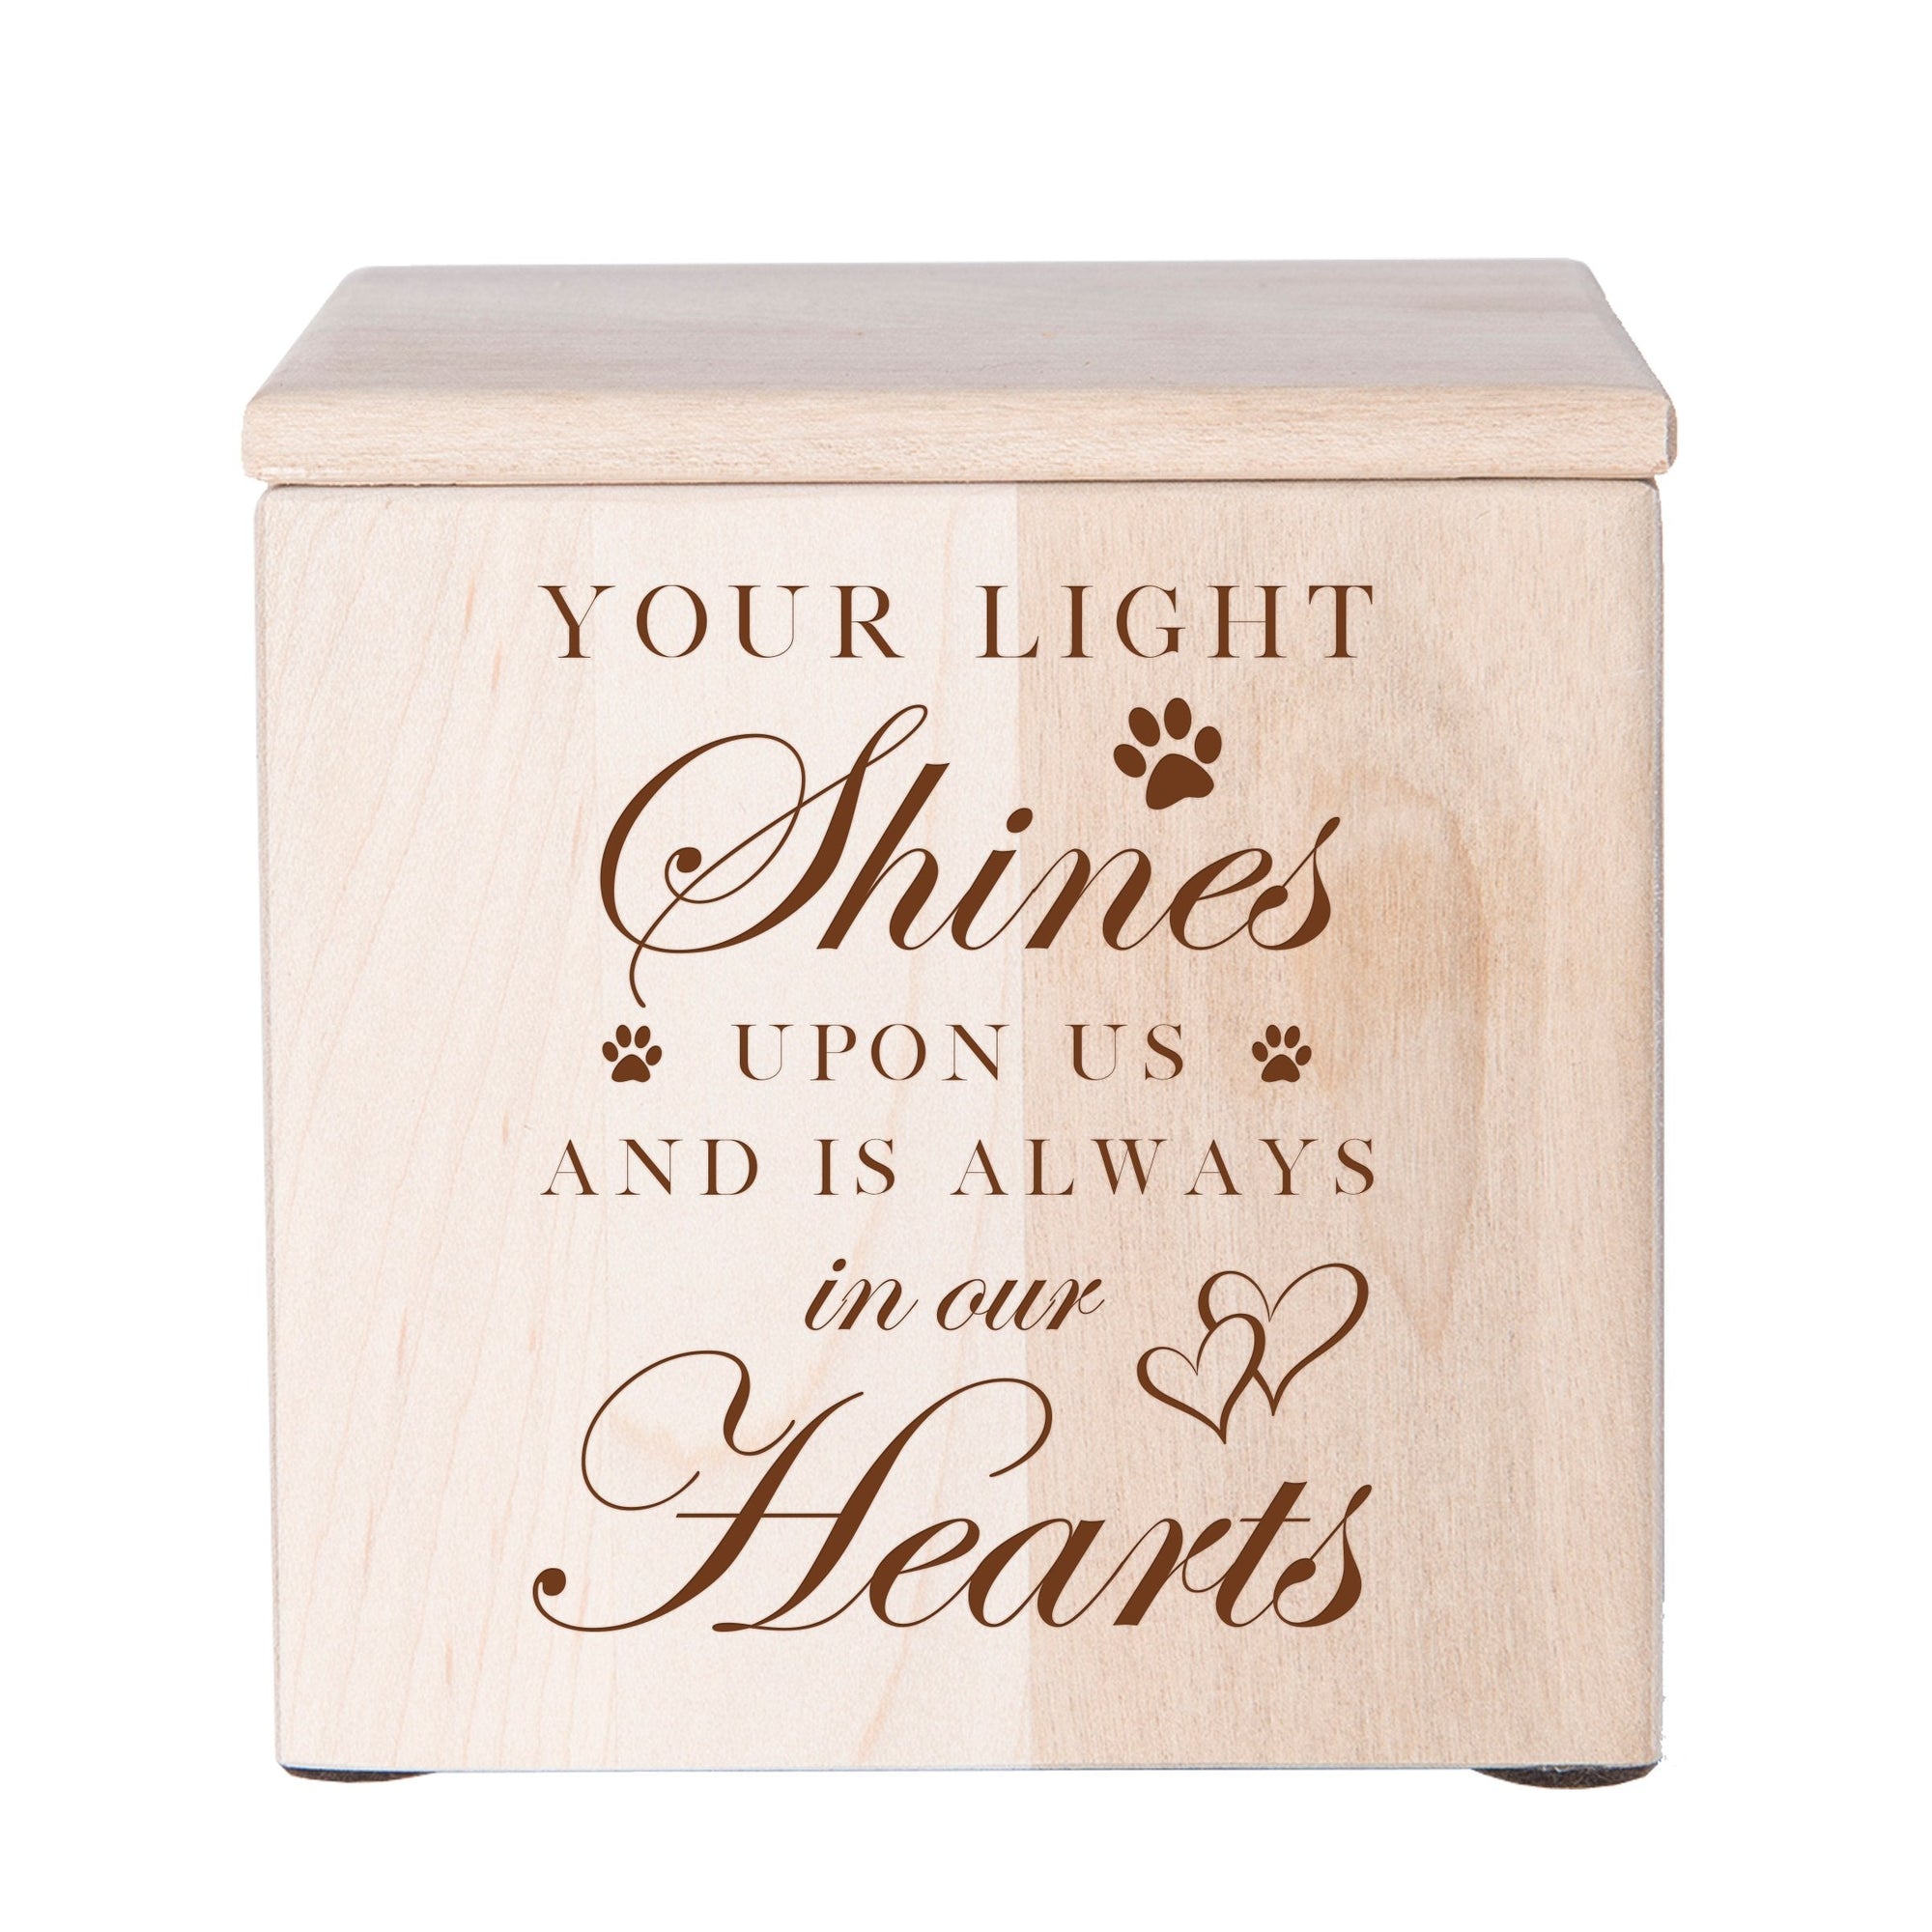 Maple Pet Memorial 3.5x3.5 Keepsake Urn with phrase "Your Light Shines"